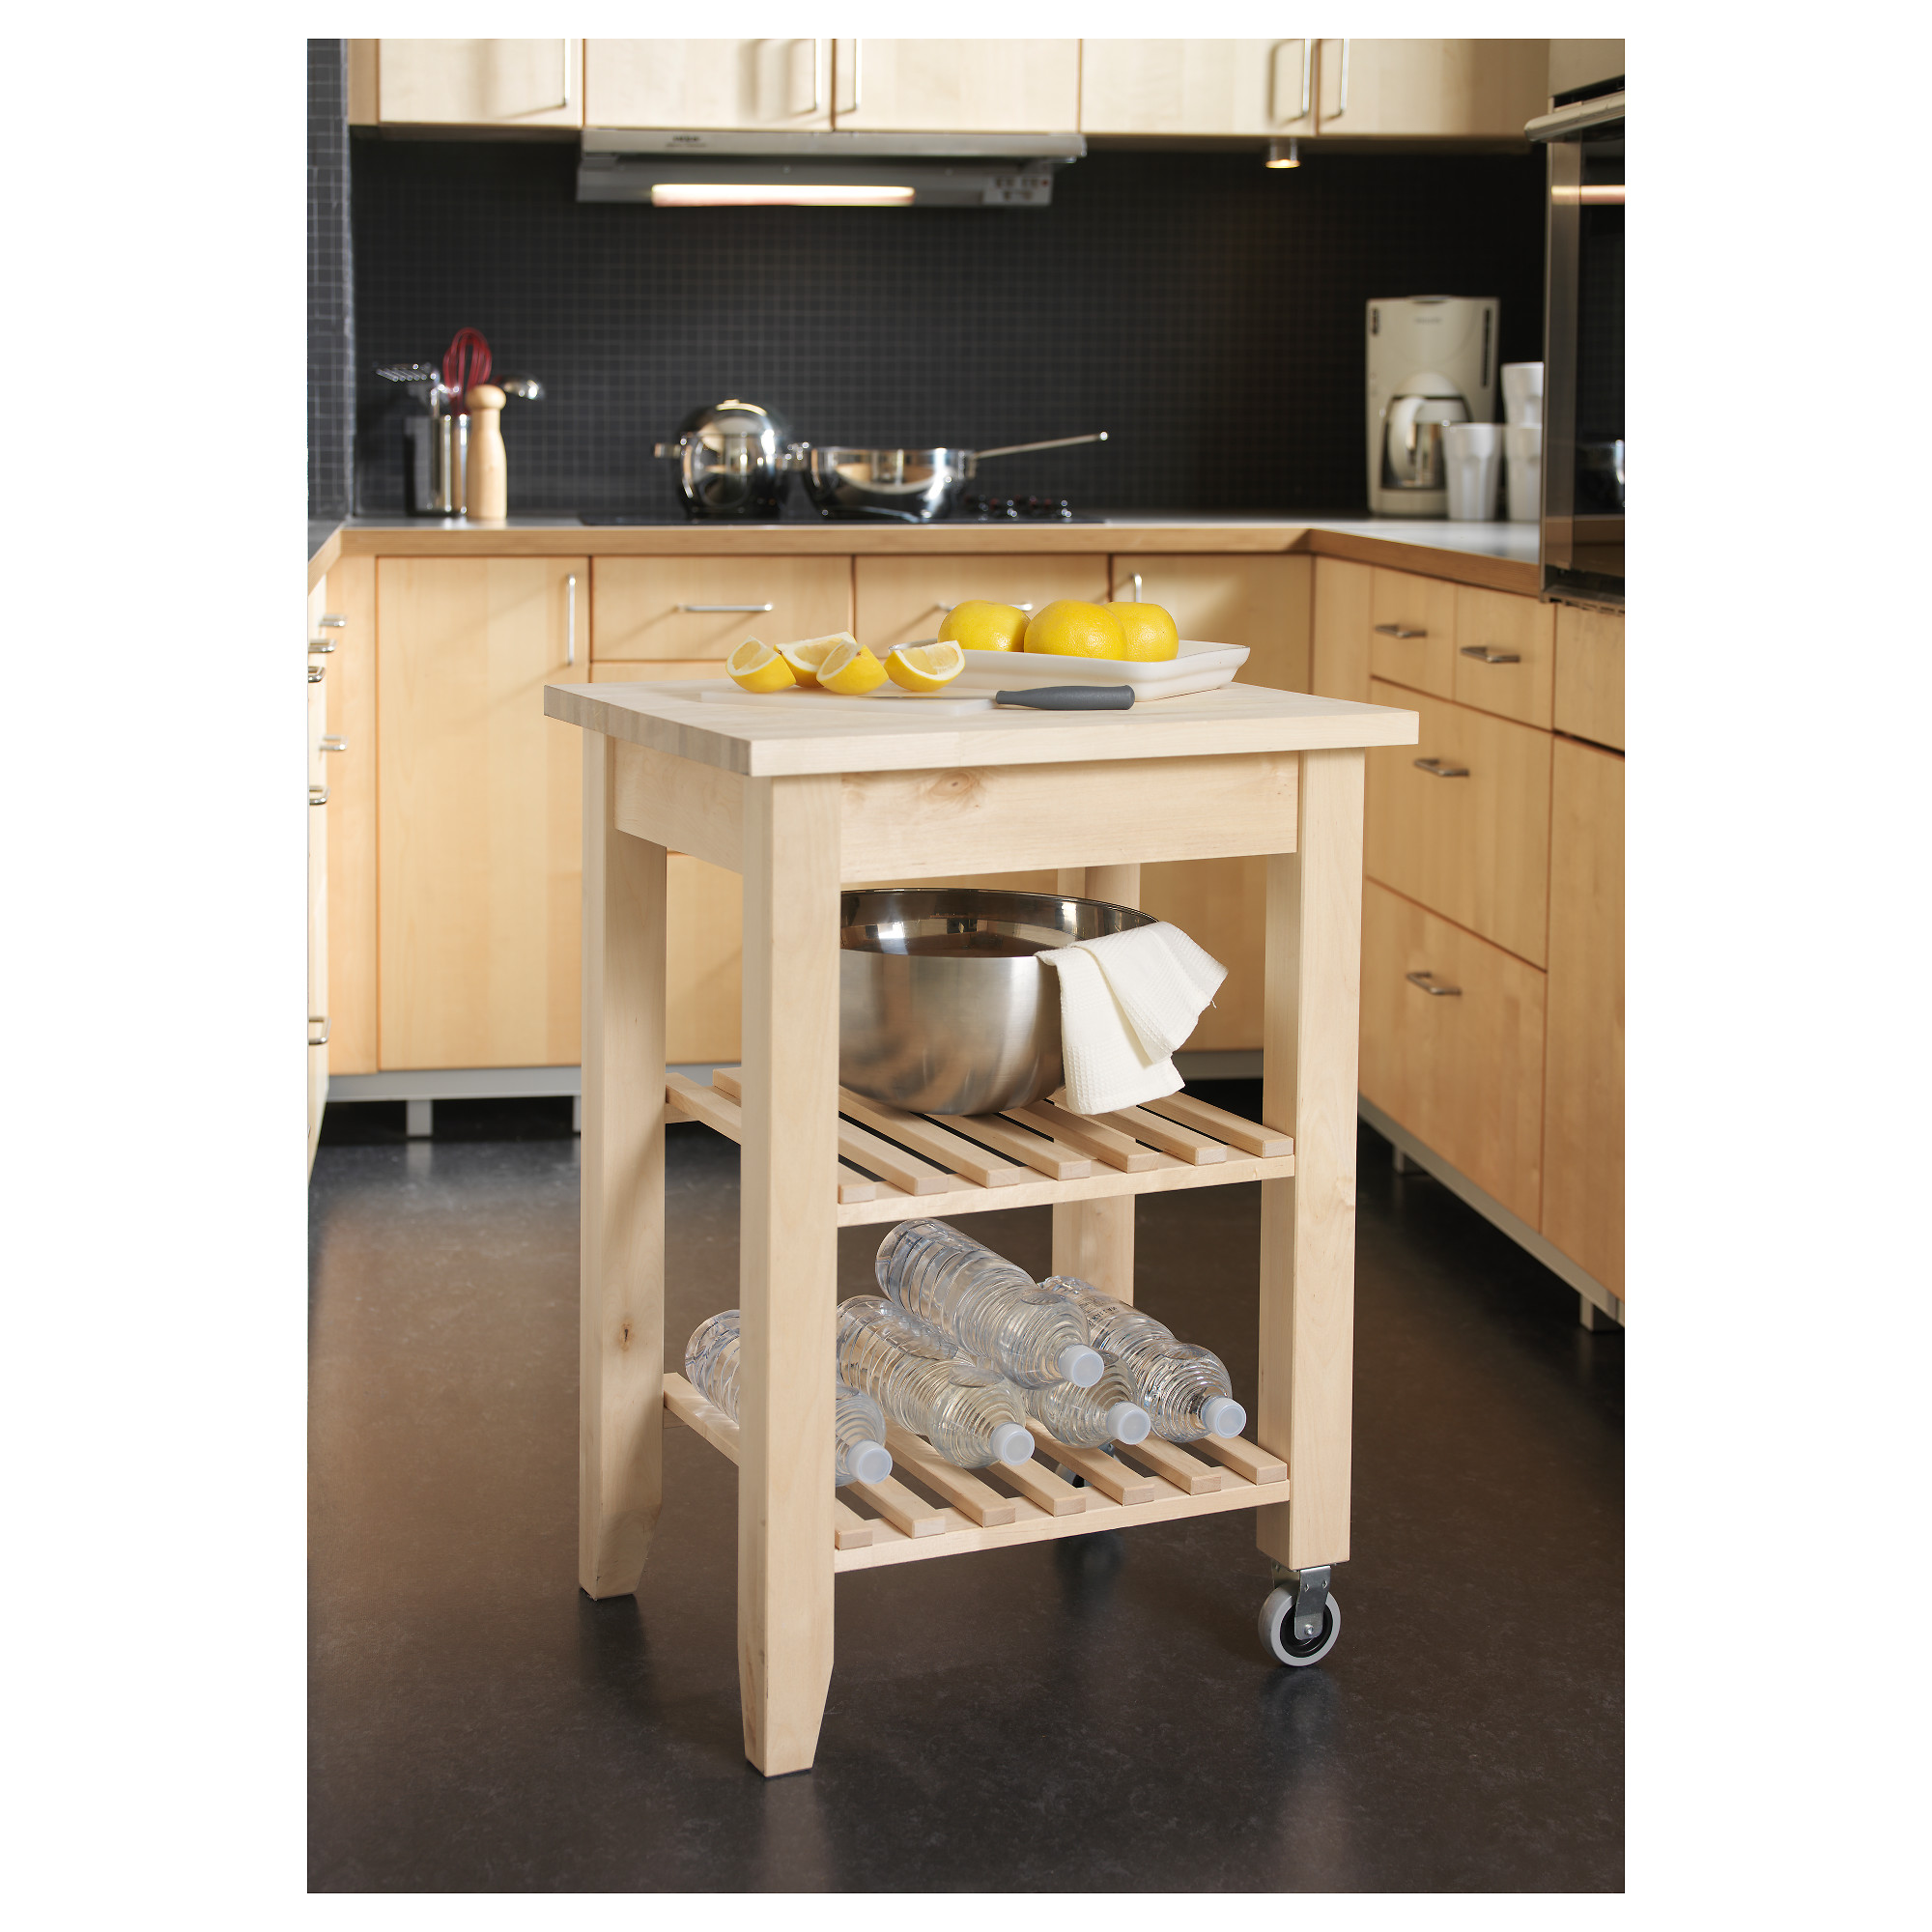 An IKEA Bekvam portable butcher block with wheels is in a clean and organized kitchen.